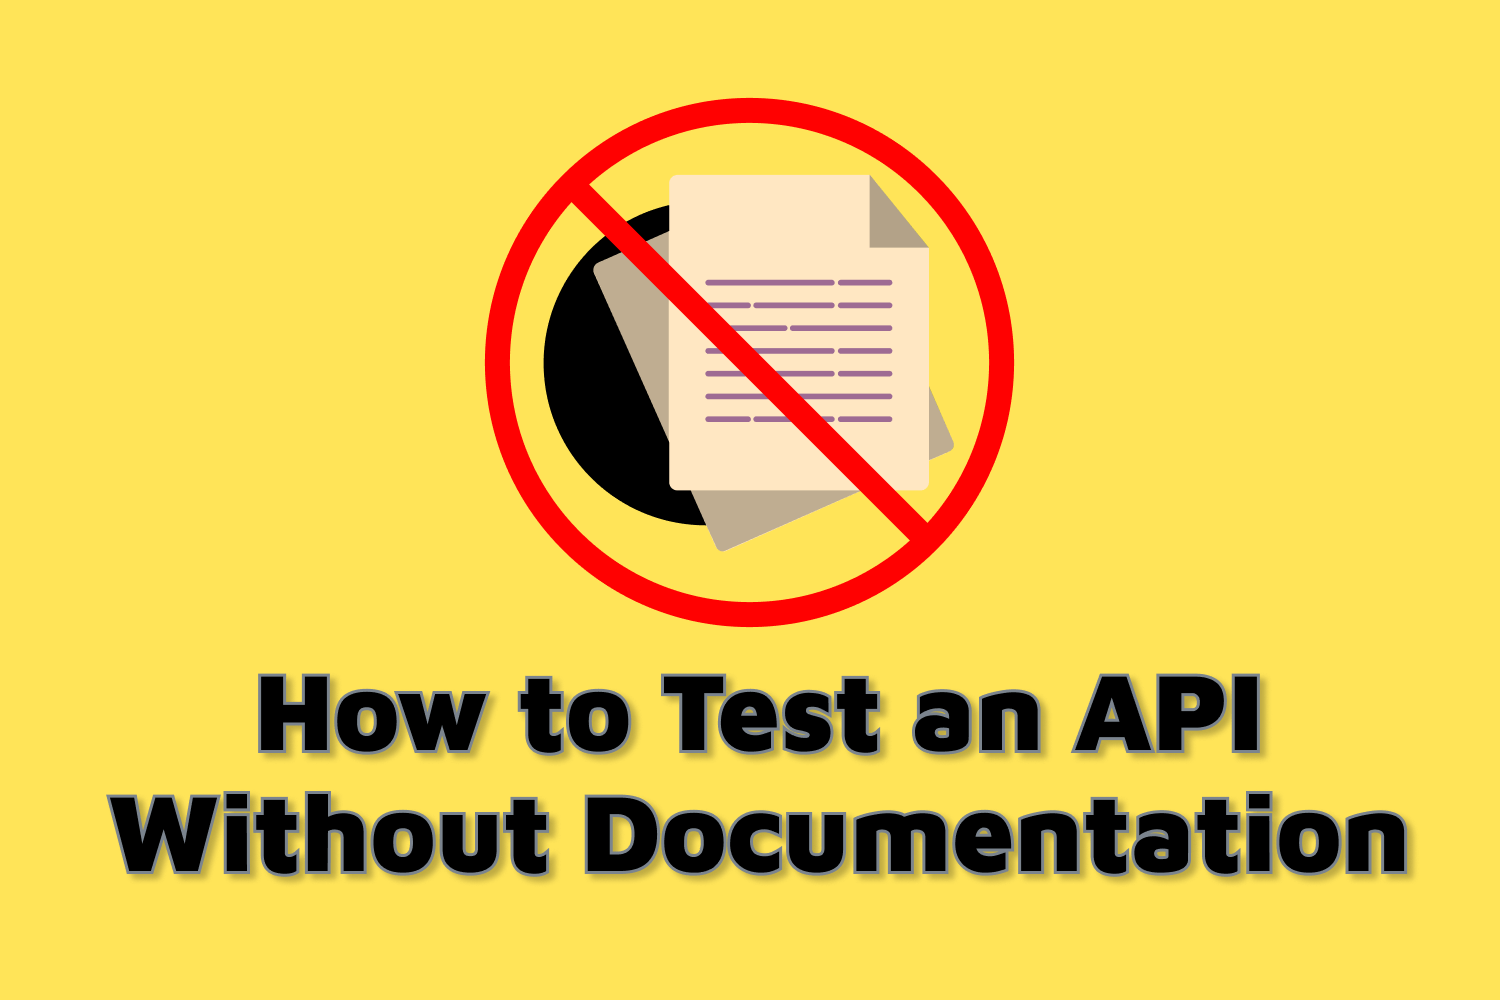 How to Test an API Without Documentation